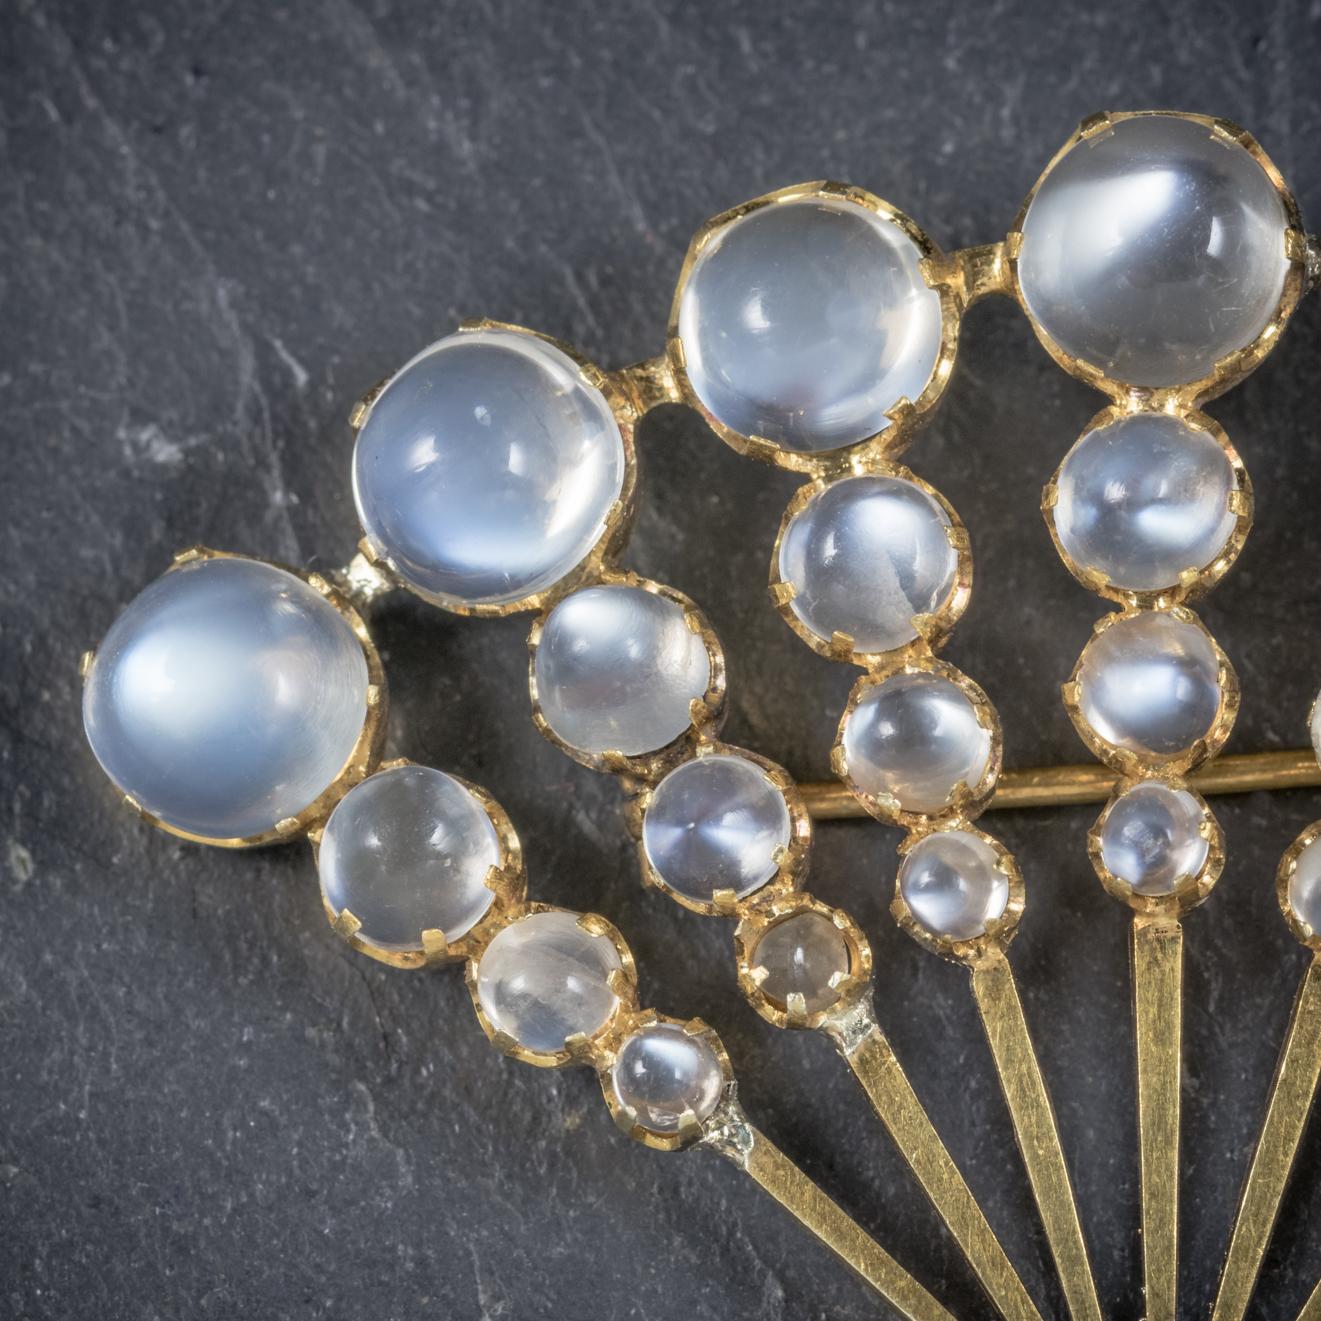 This beautiful Moonstone fan brooch is from the Art Deco period, Circa 1920.

The fabulous piece is adorned with 29 ghostly Moonstones, the largest of which is 3.5ct.

Set in a fancy fan shaped setting which is all 18ct Yellow Gold.

This is a